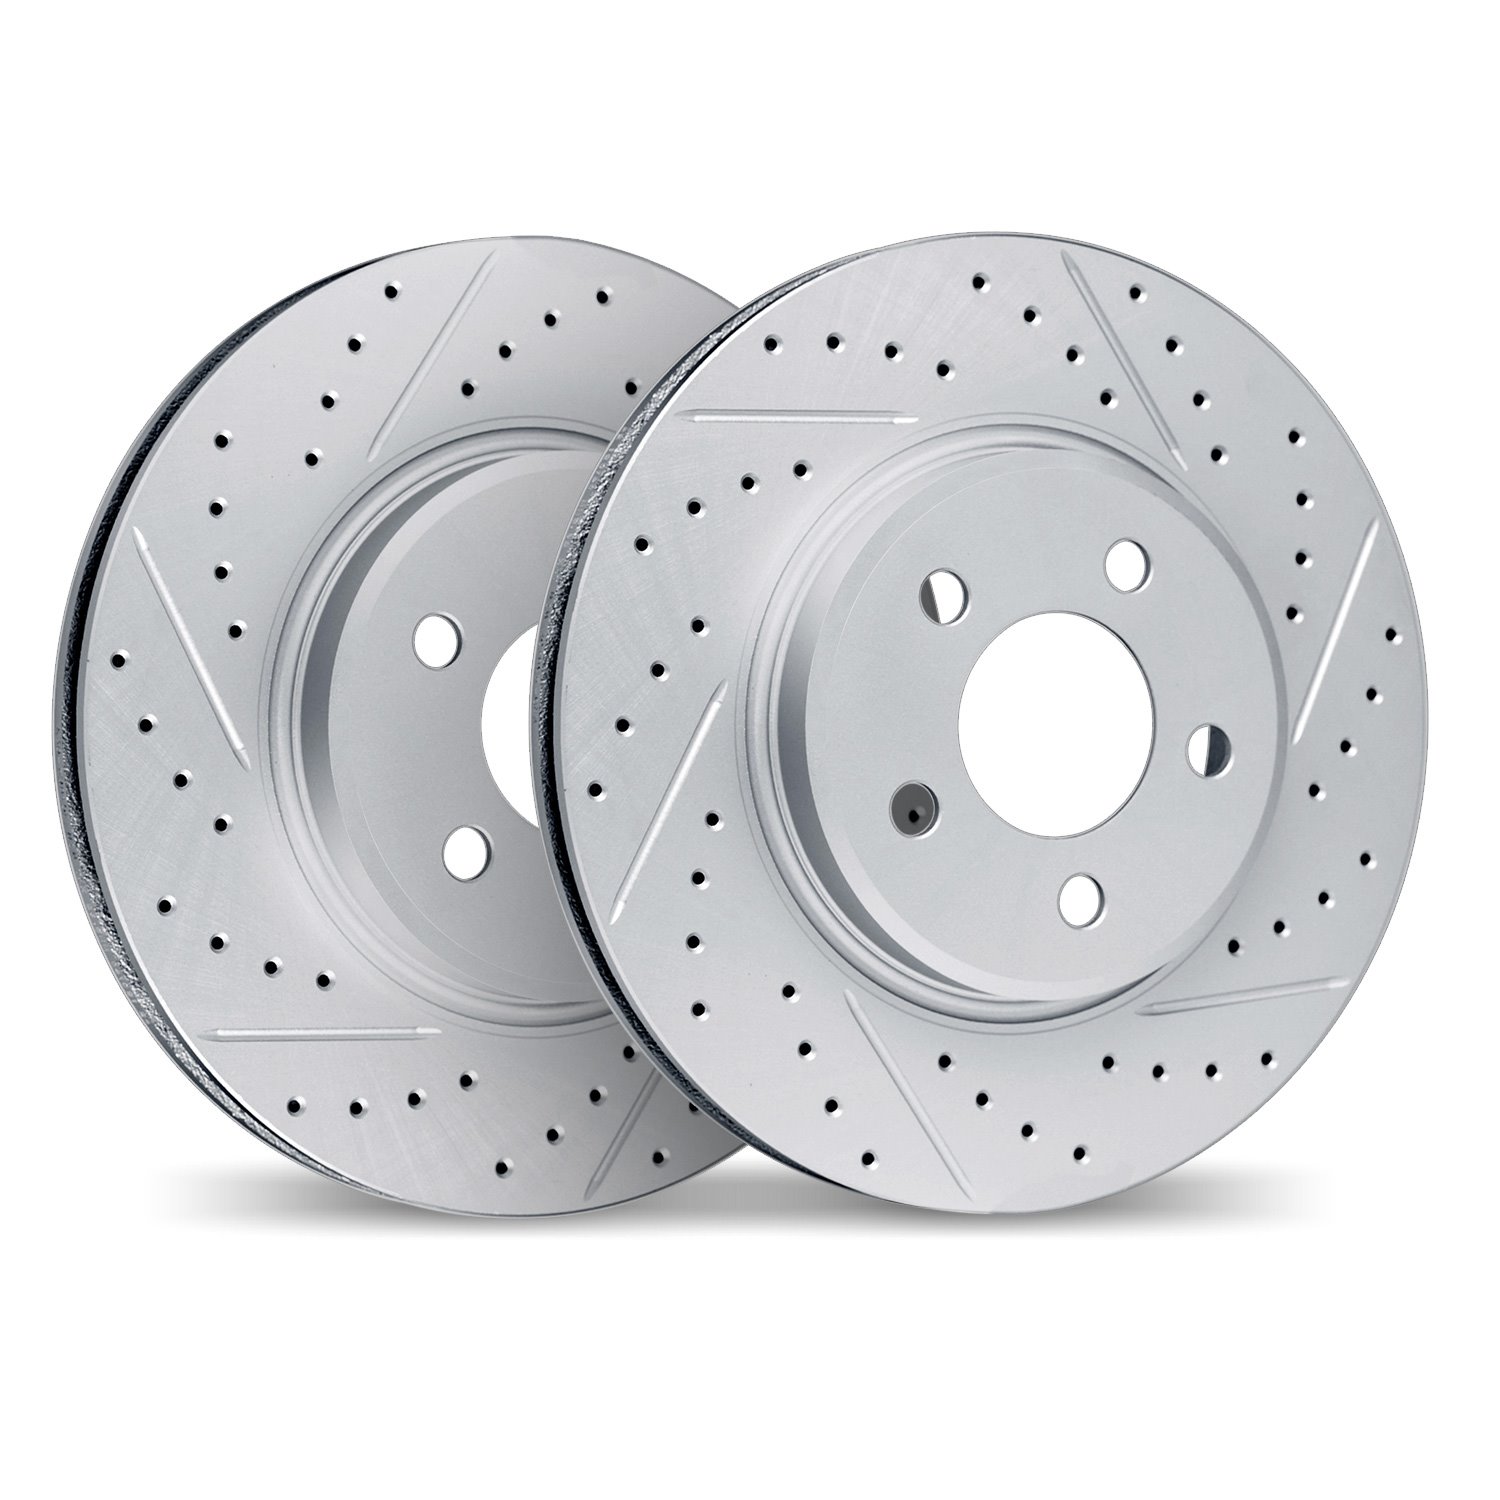 2002-47020 Geoperformance Drilled/Slotted Brake Rotors, 1988-1996 GM, Position: Front